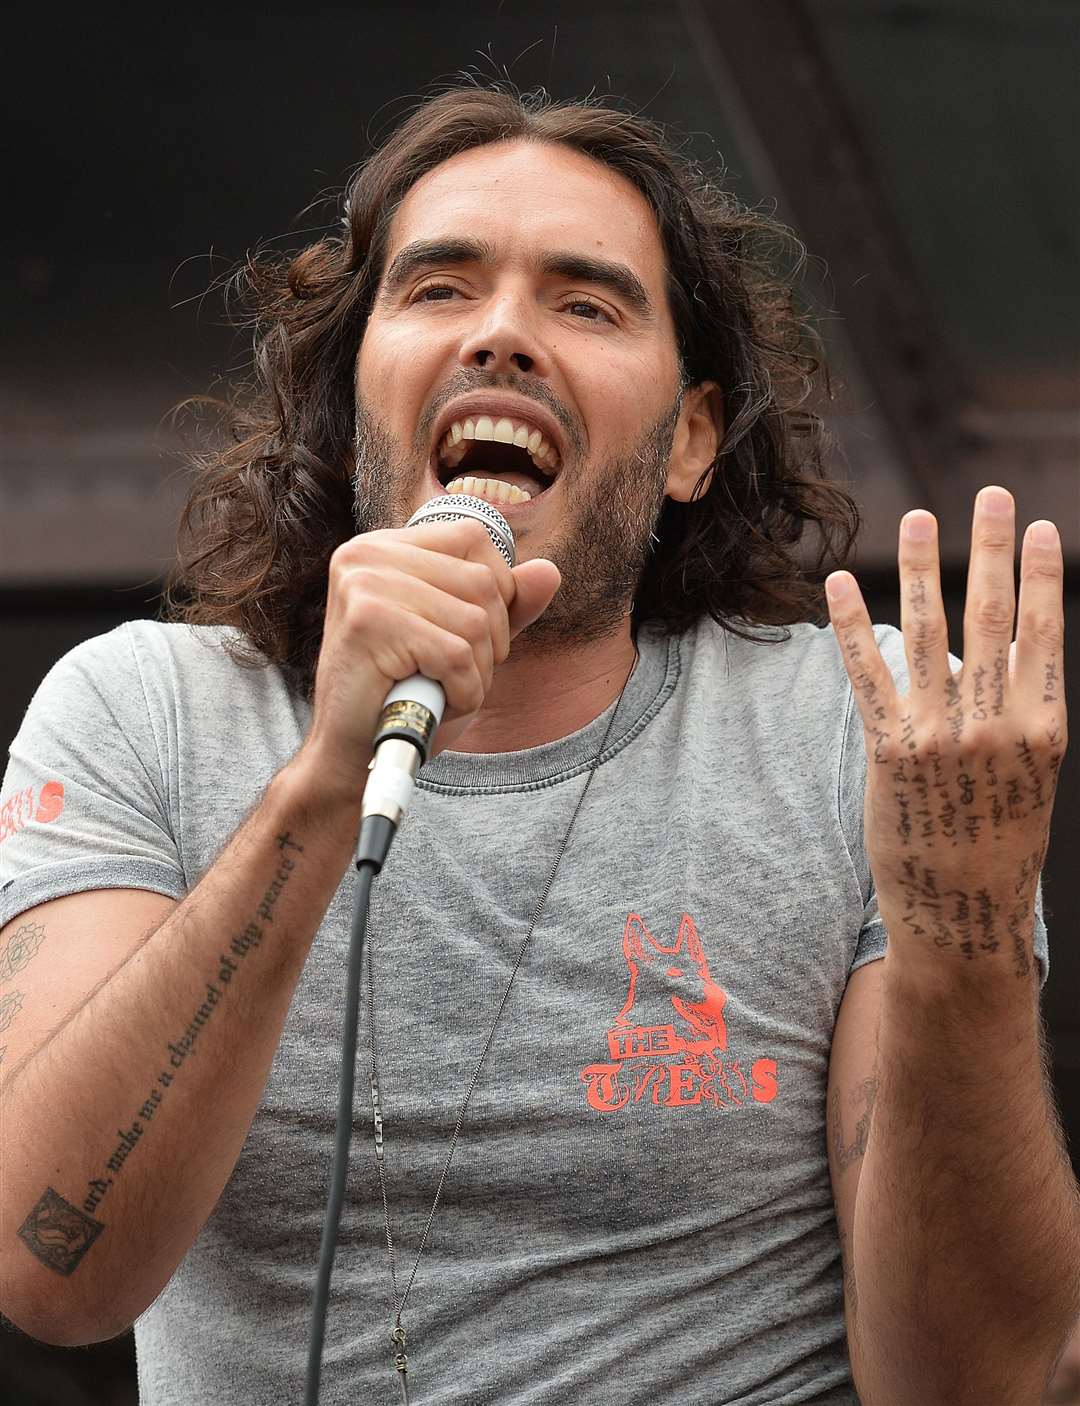 Russell Brand has been accused of pursuing audience members for sex (John Stillwell/PA)